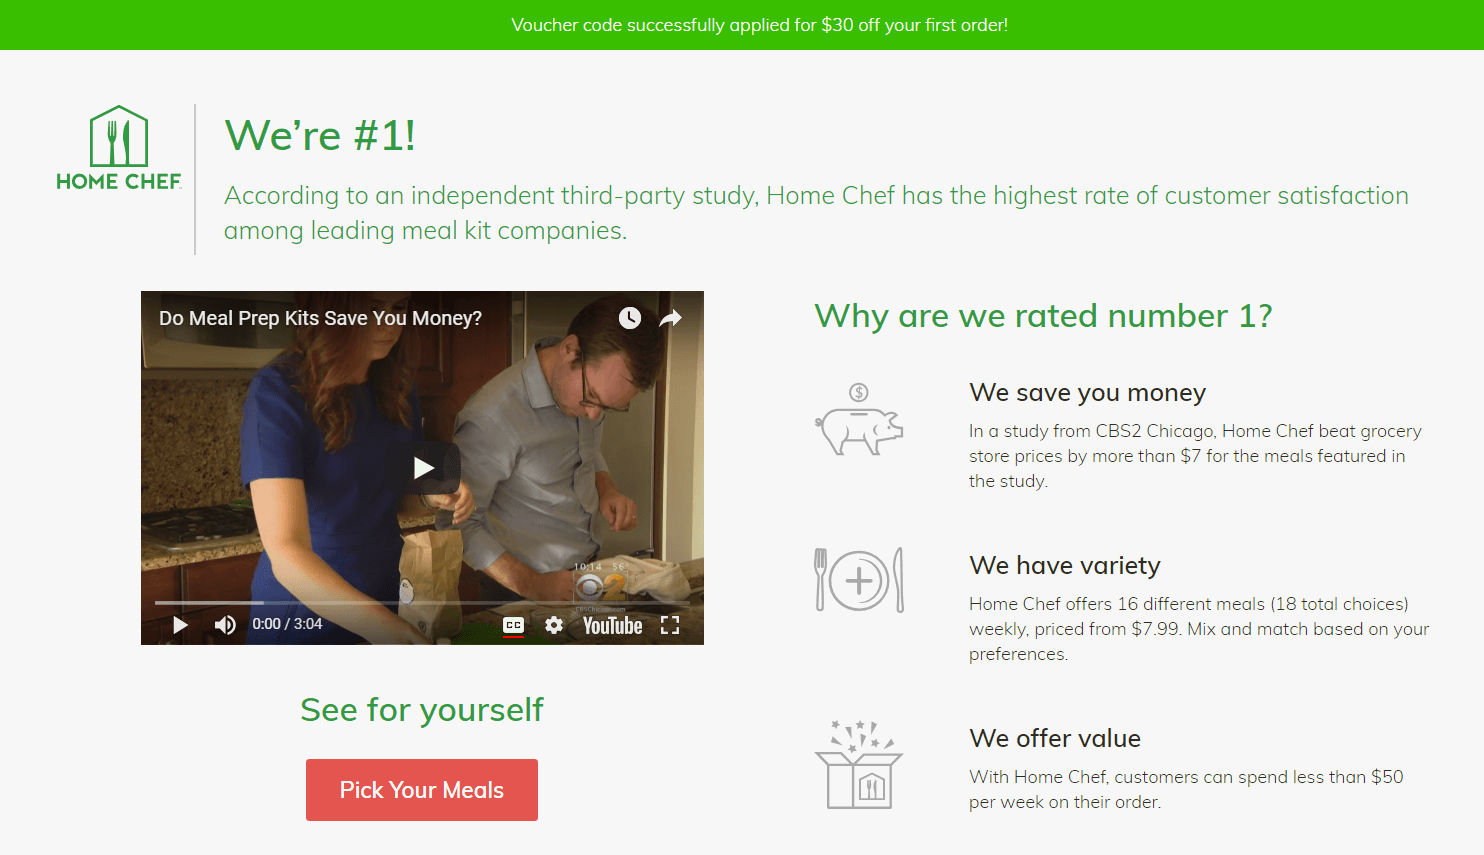 Home Chef chose a bright CTA button that stands out